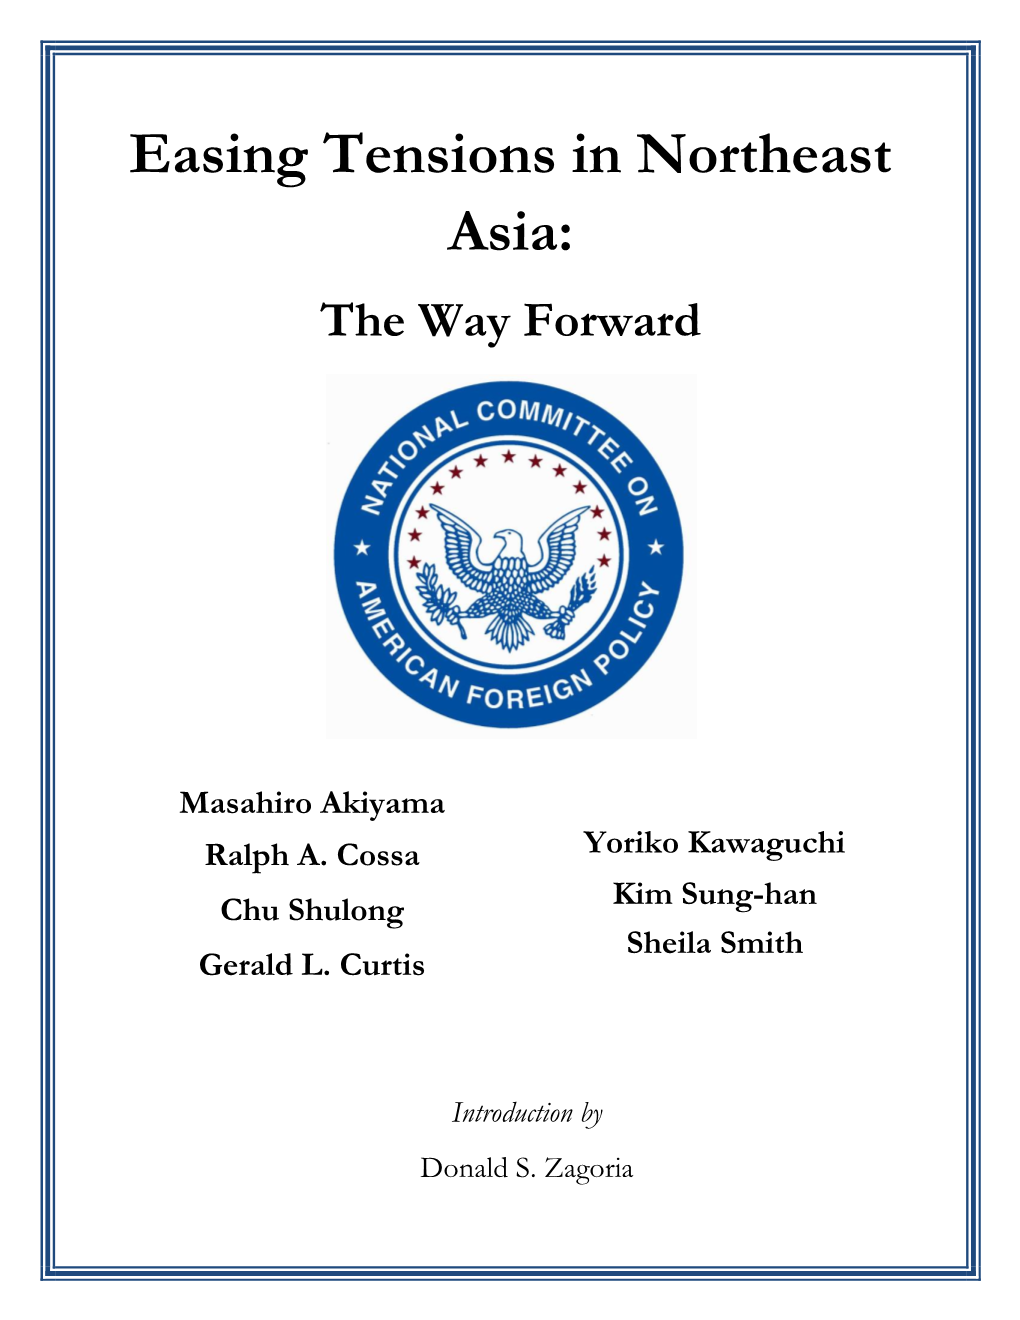 Easing Tensions in Northeast Asia: the Way Forward